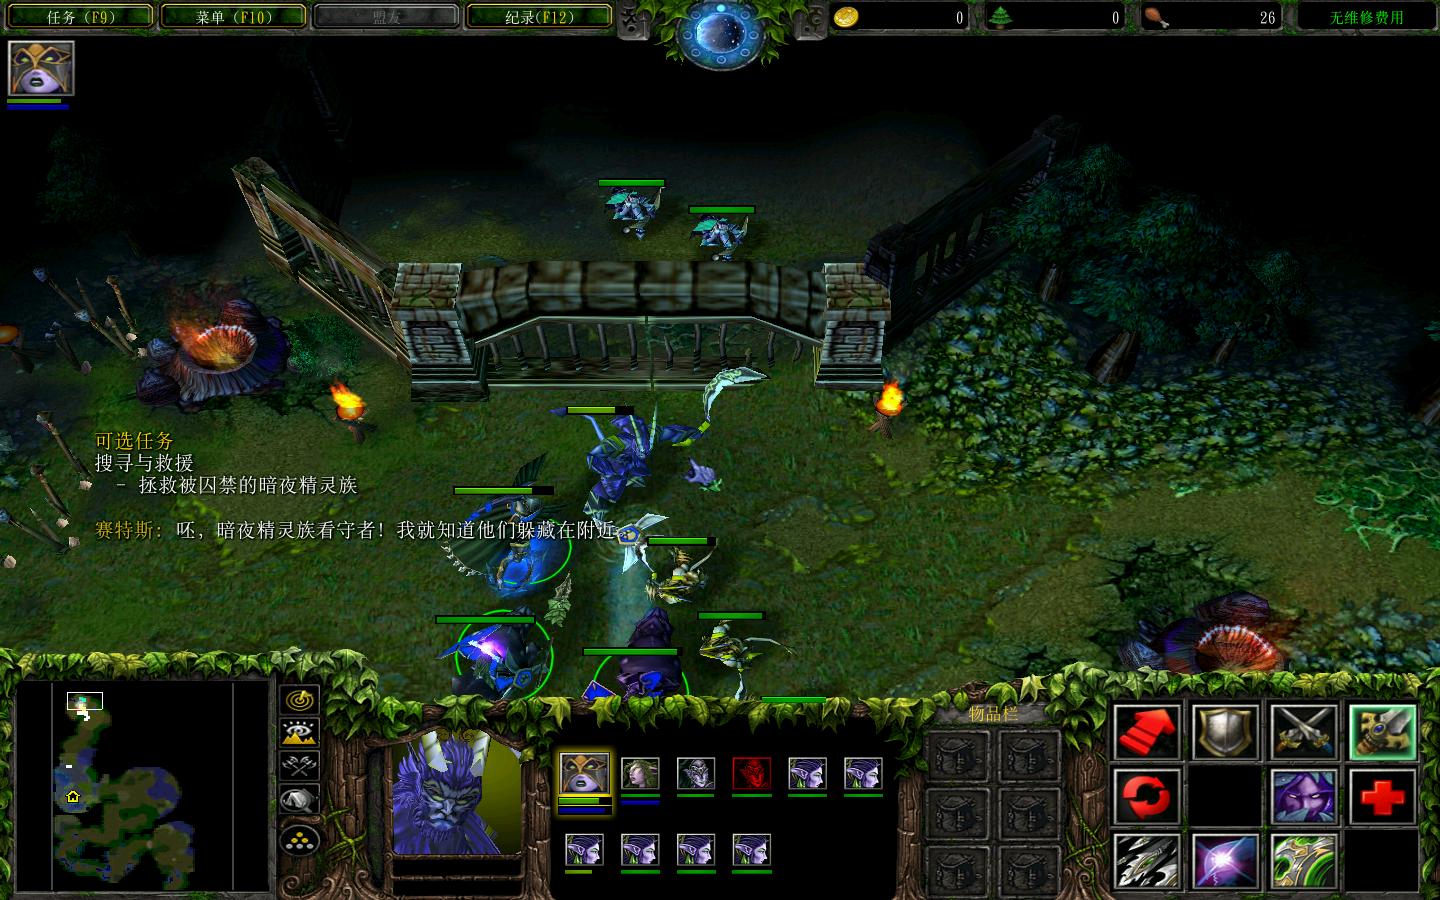 ħ3Warcraft III The Frozen Thronev1.24Ԫv1.21